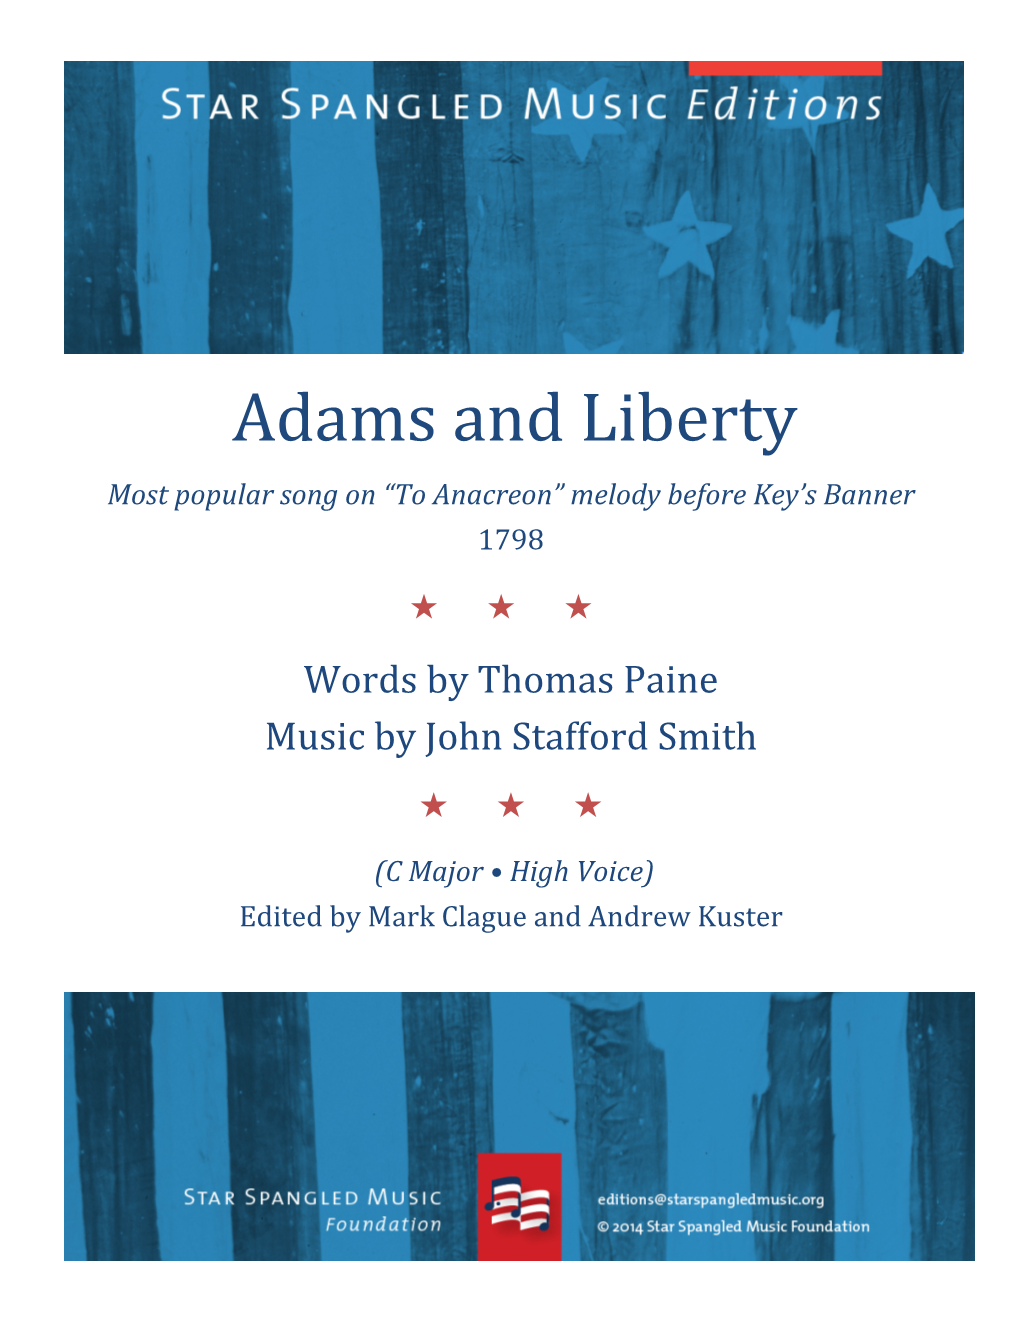 Adams and Liberty Most Popular Song on “To Anacreon” Melody Before Key’S Banner 1798